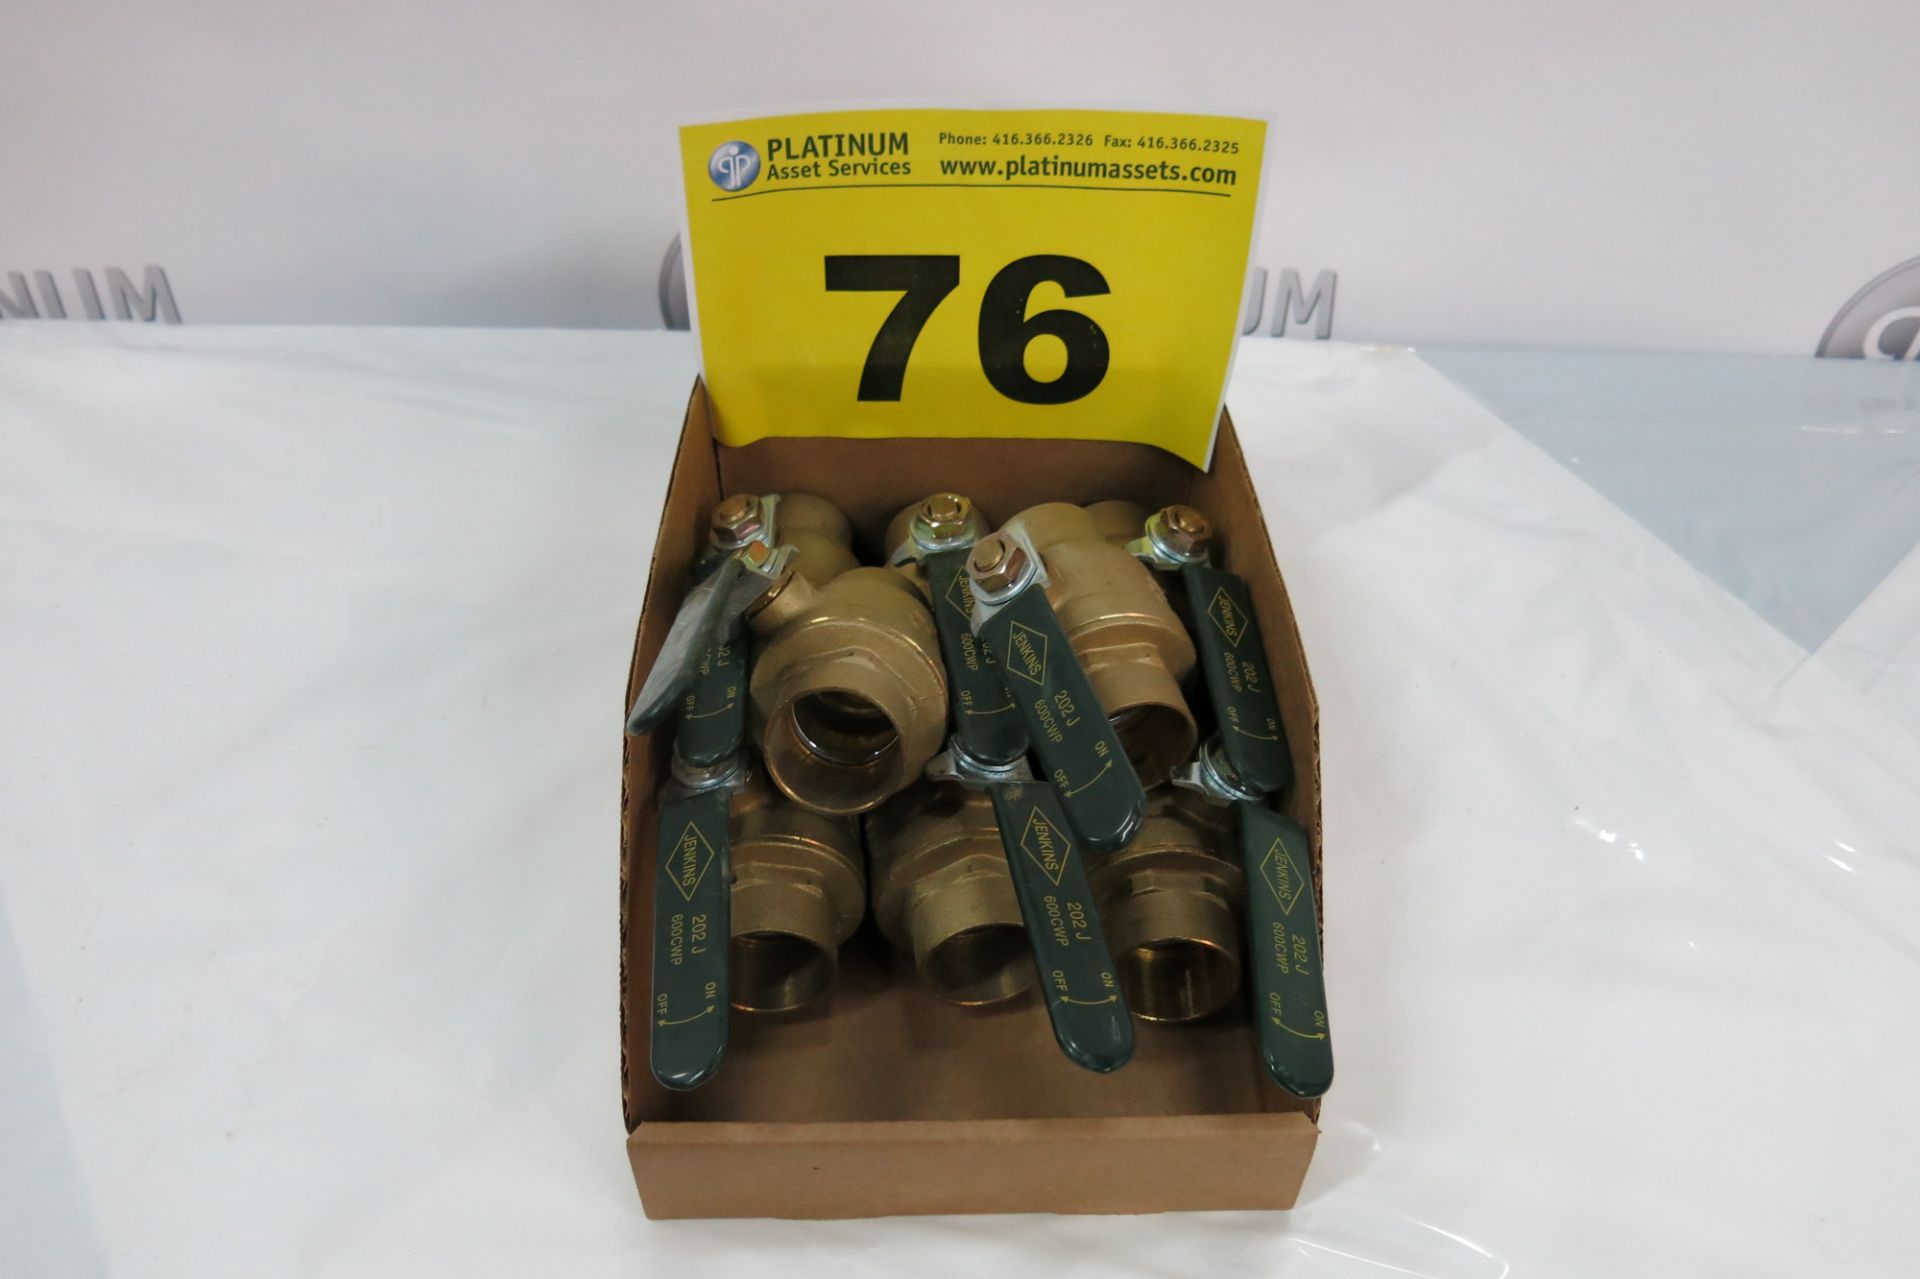 LOT OF JENKINS, 202J, 1 1/2", BALL VALVES - NEW (LOCATED IN SCARBOROUGH)